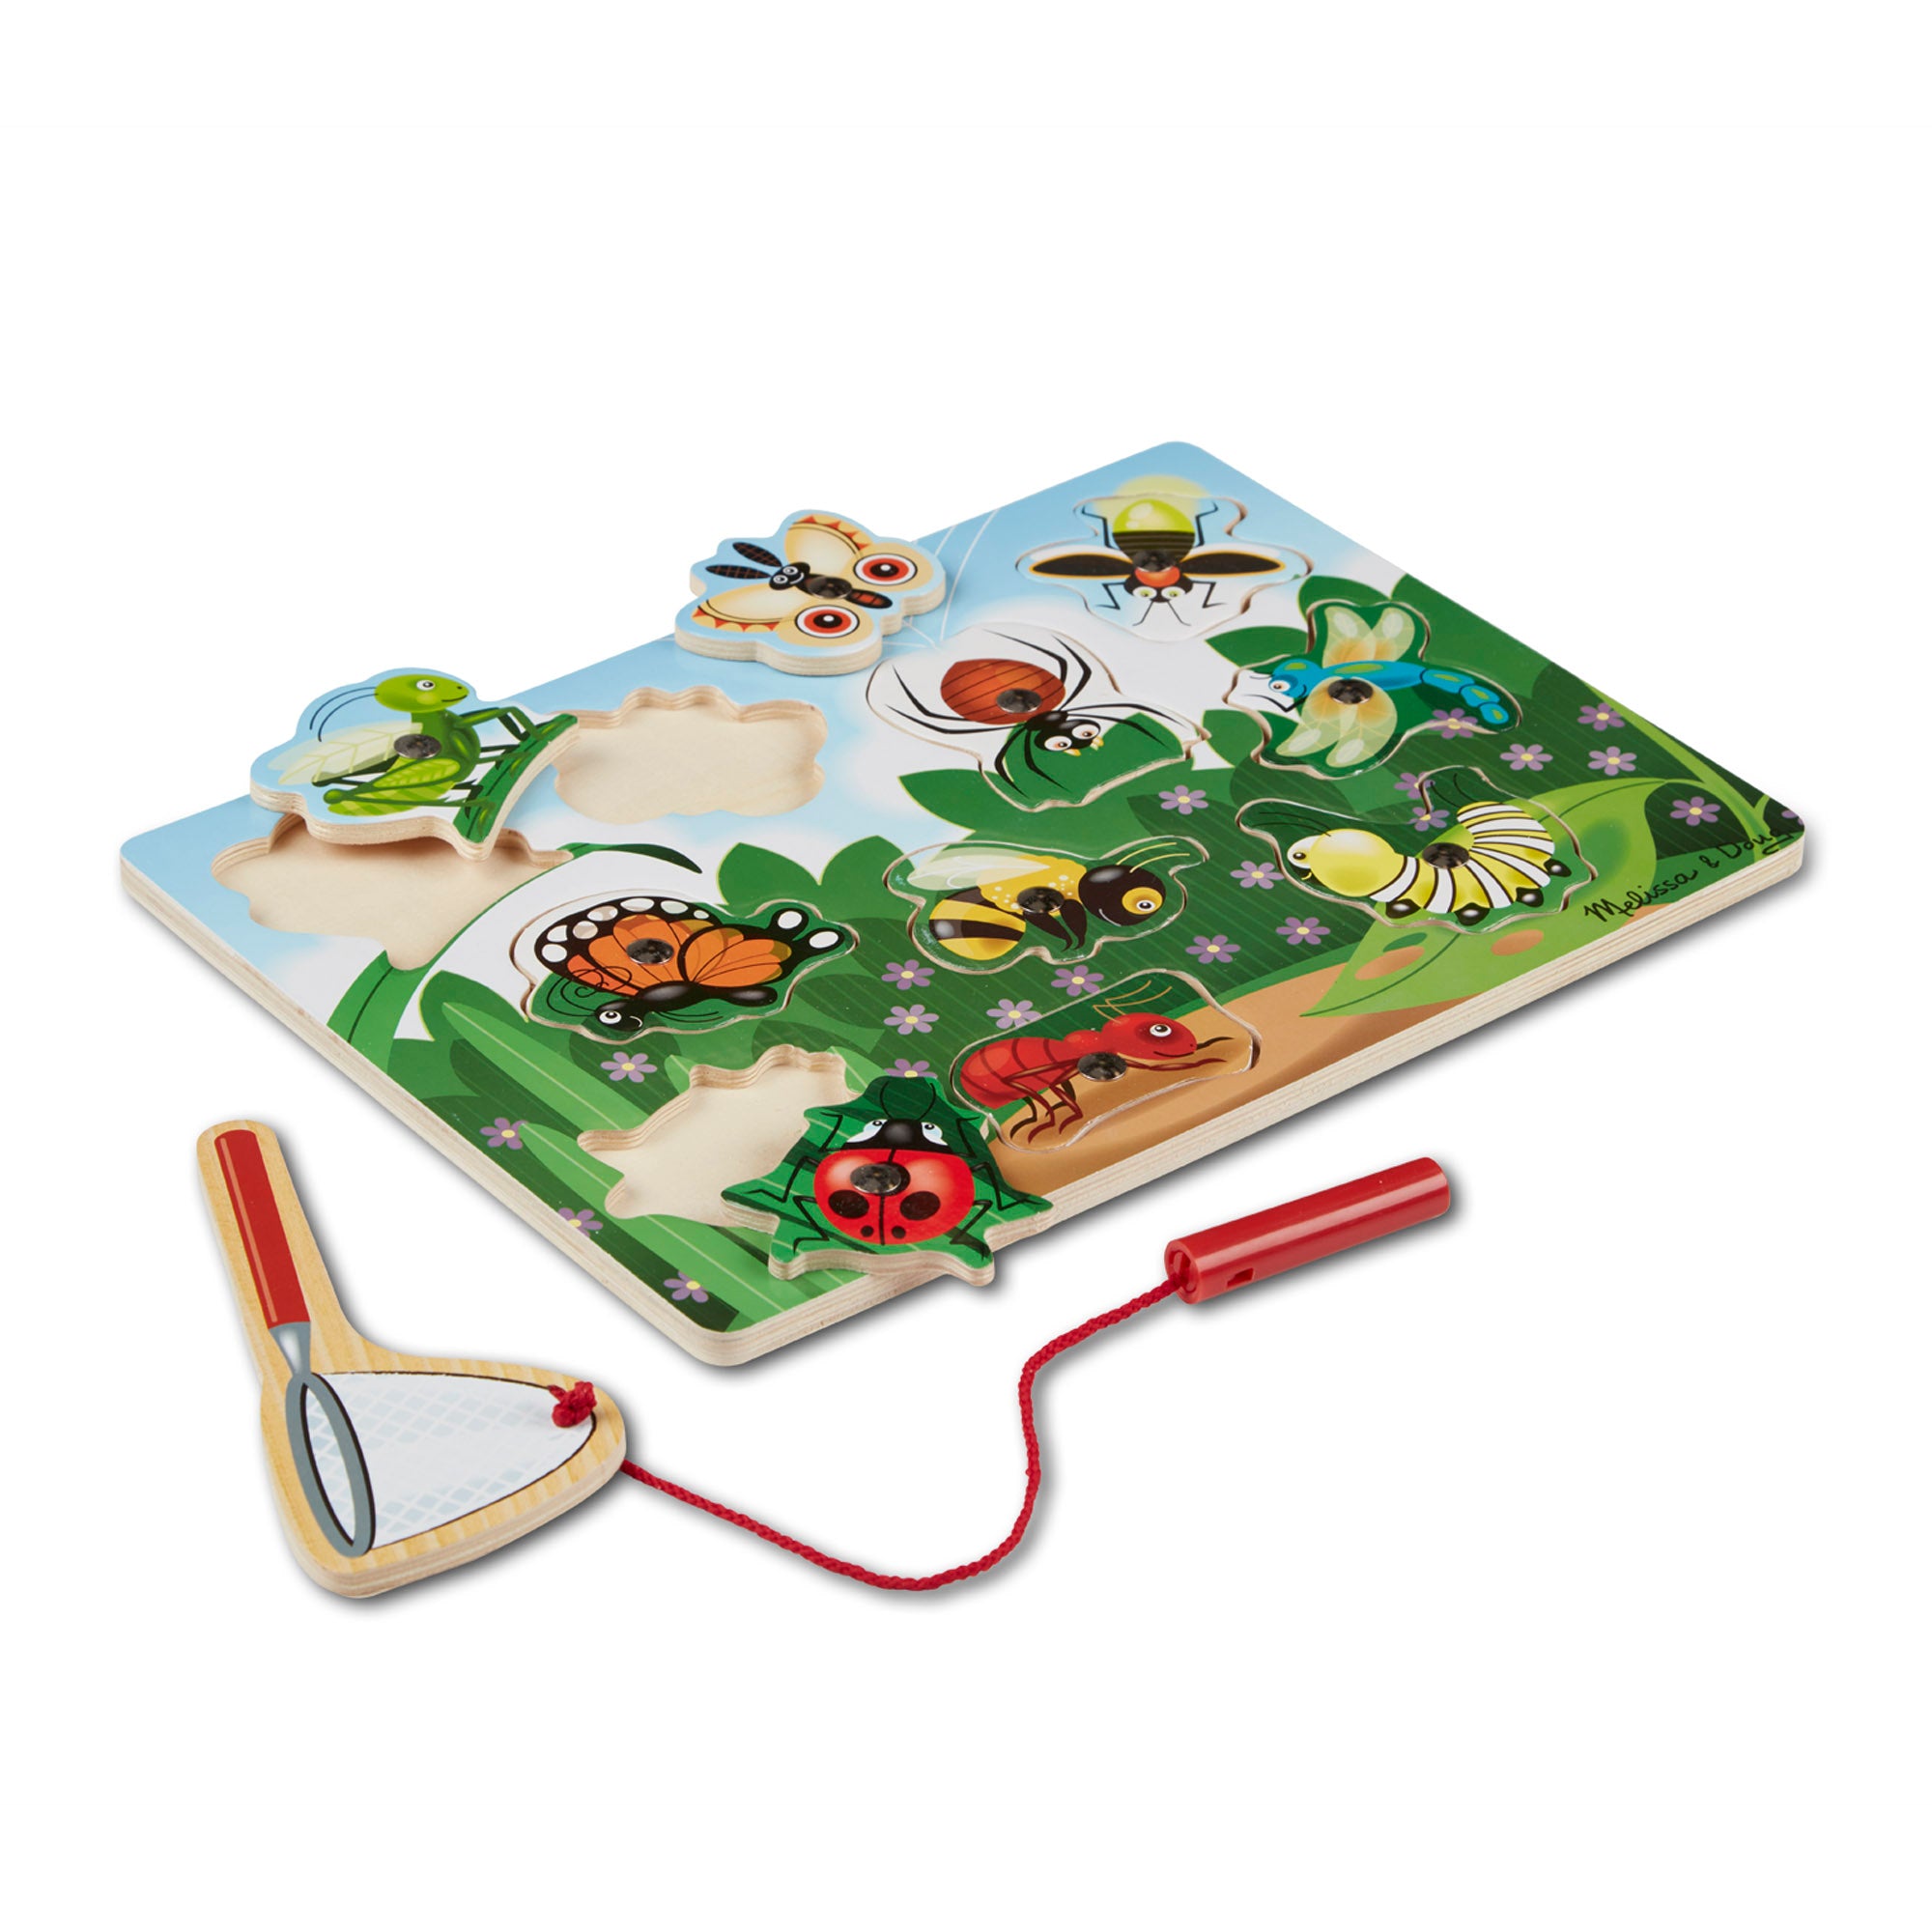 This magnetic wooden puzzle game features a garden full of attractive bugs and insects! Use the magnetic butterfly net to "capture" the 10 bug buddies from the game board. Then enjoy the challenge of returning them to their preferred perch!